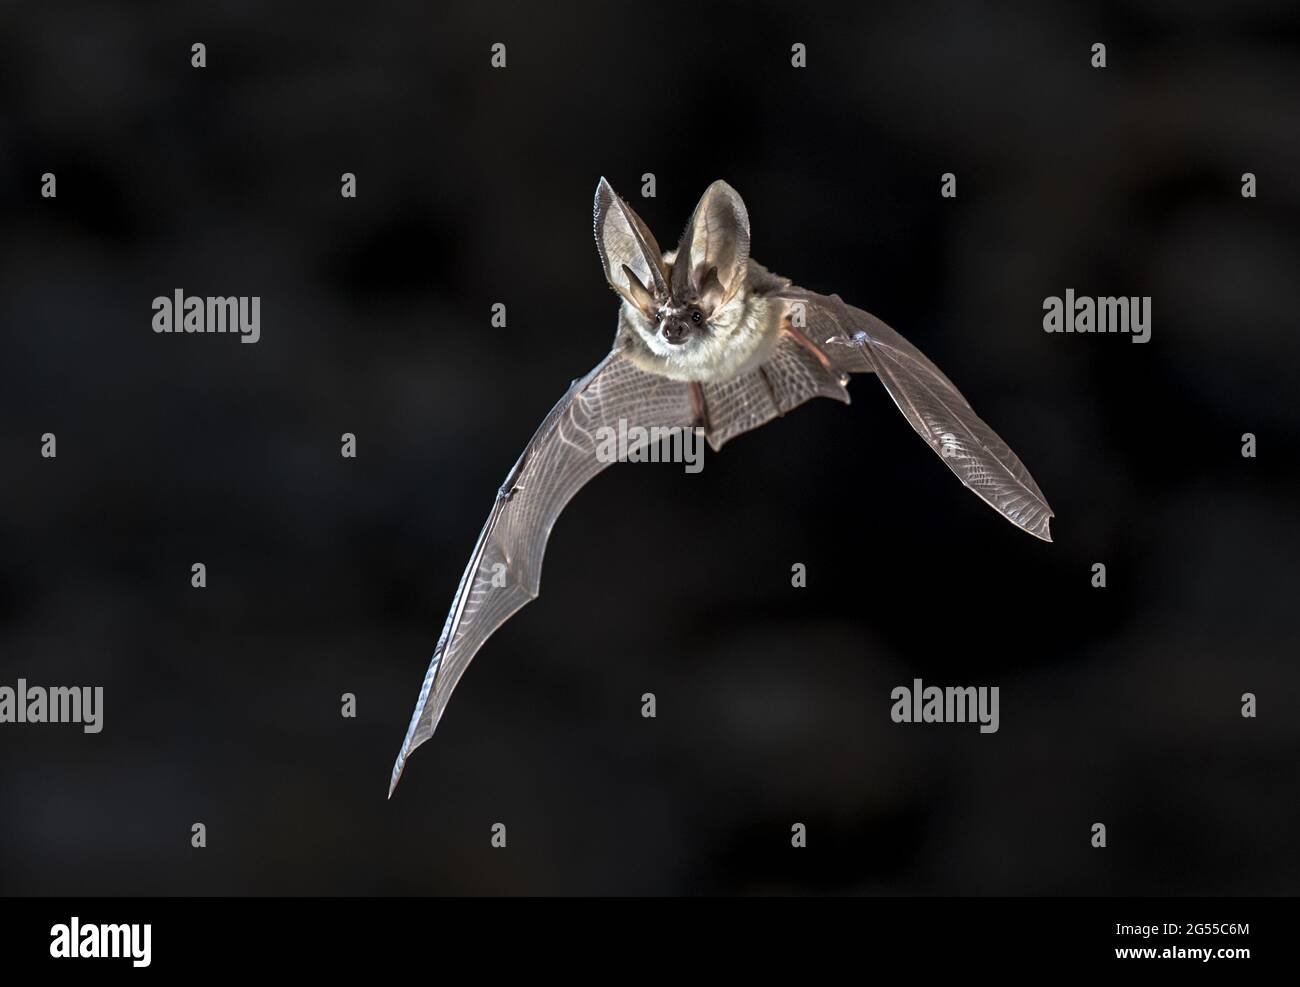 Flying bat on dark background. The grey long-eared bat (Plecotus austriacus) is a fairly large European bat. It has distinctive ears, long and with a Stock Photo